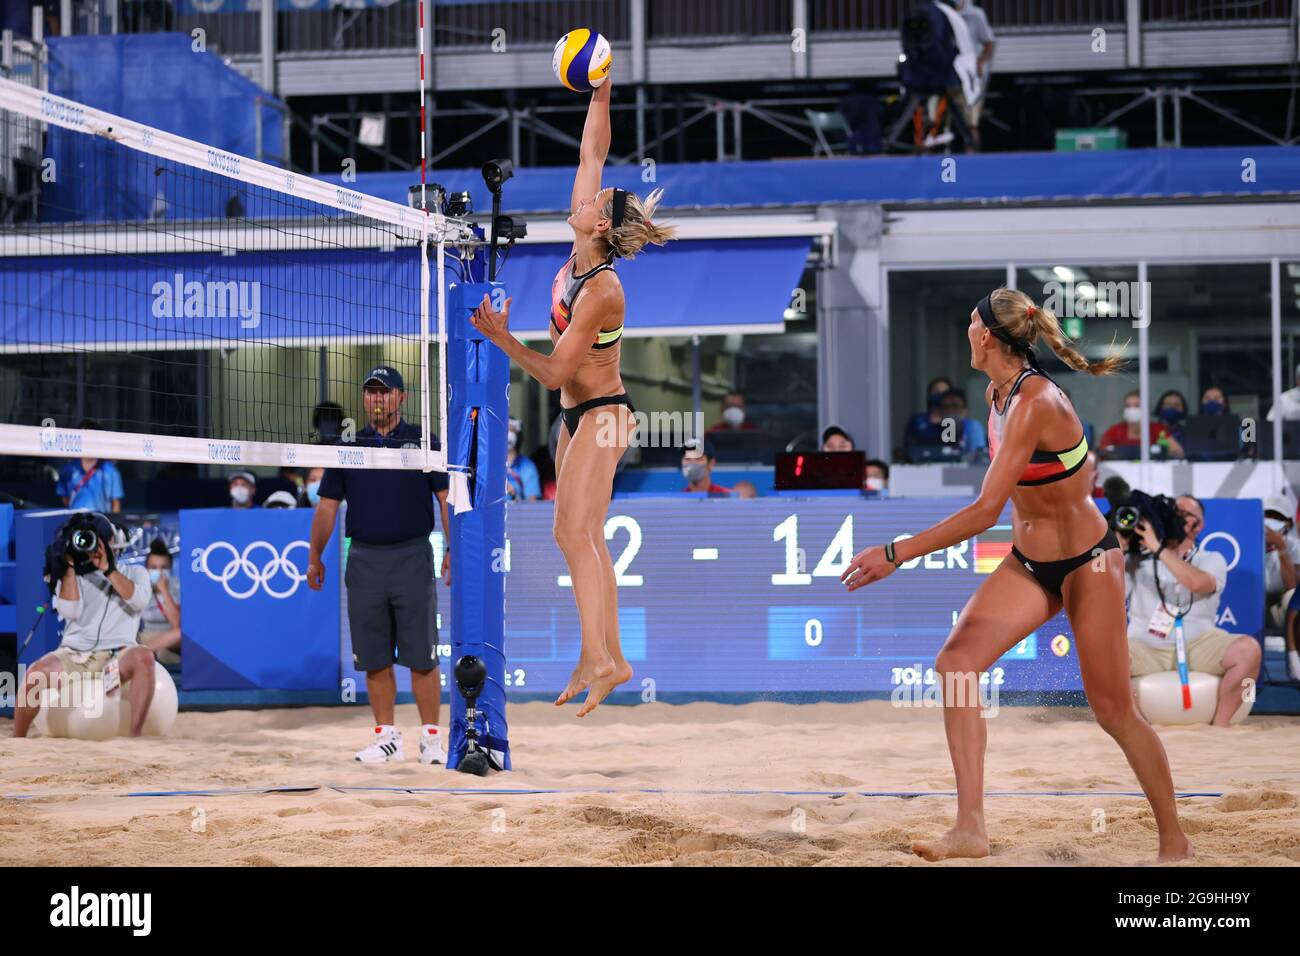 Tokyo, Japan. 26th July, 2021. Laura Ludwig & Margareta Kozuch (GER) Beach Volleyball : Women's Preliminary during the Tokyo 2020 Olympic Games at the Shiokaze Park in Tokyo, Japan . Credit: Naoki Morita/AFLO SPORT/Alamy Live News Stock Photo